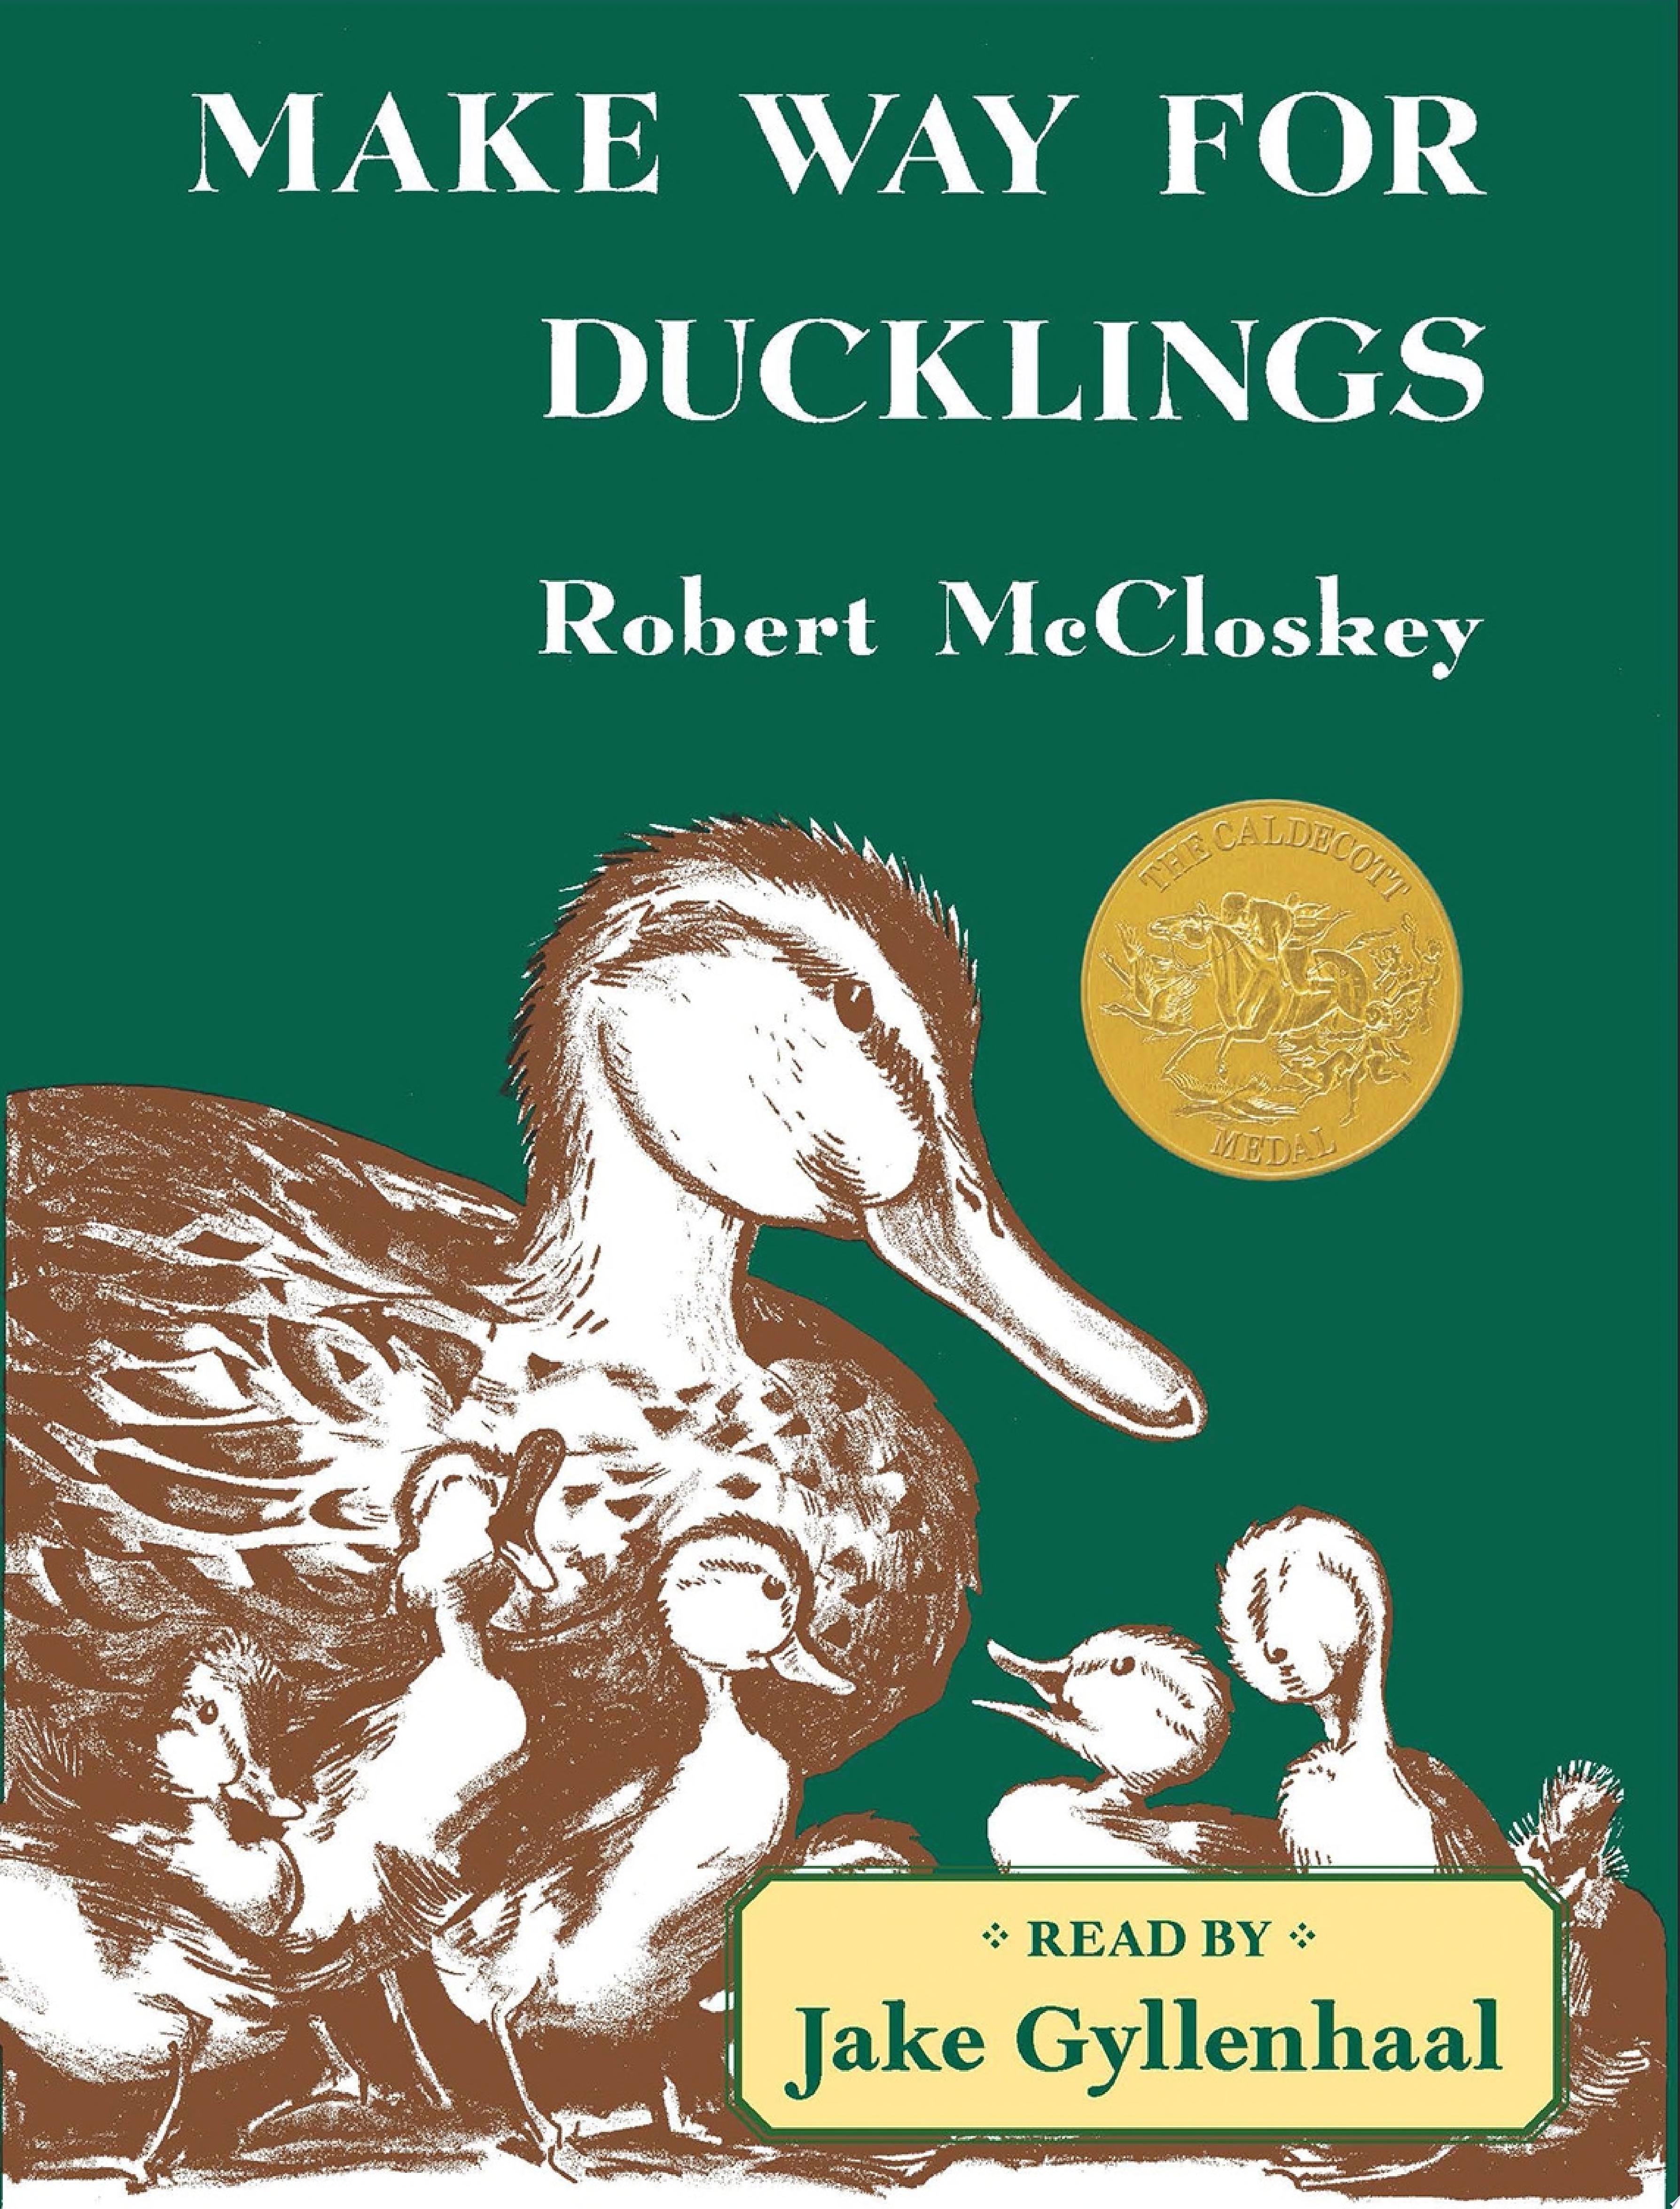 Image for "Make Way for Ducklings"